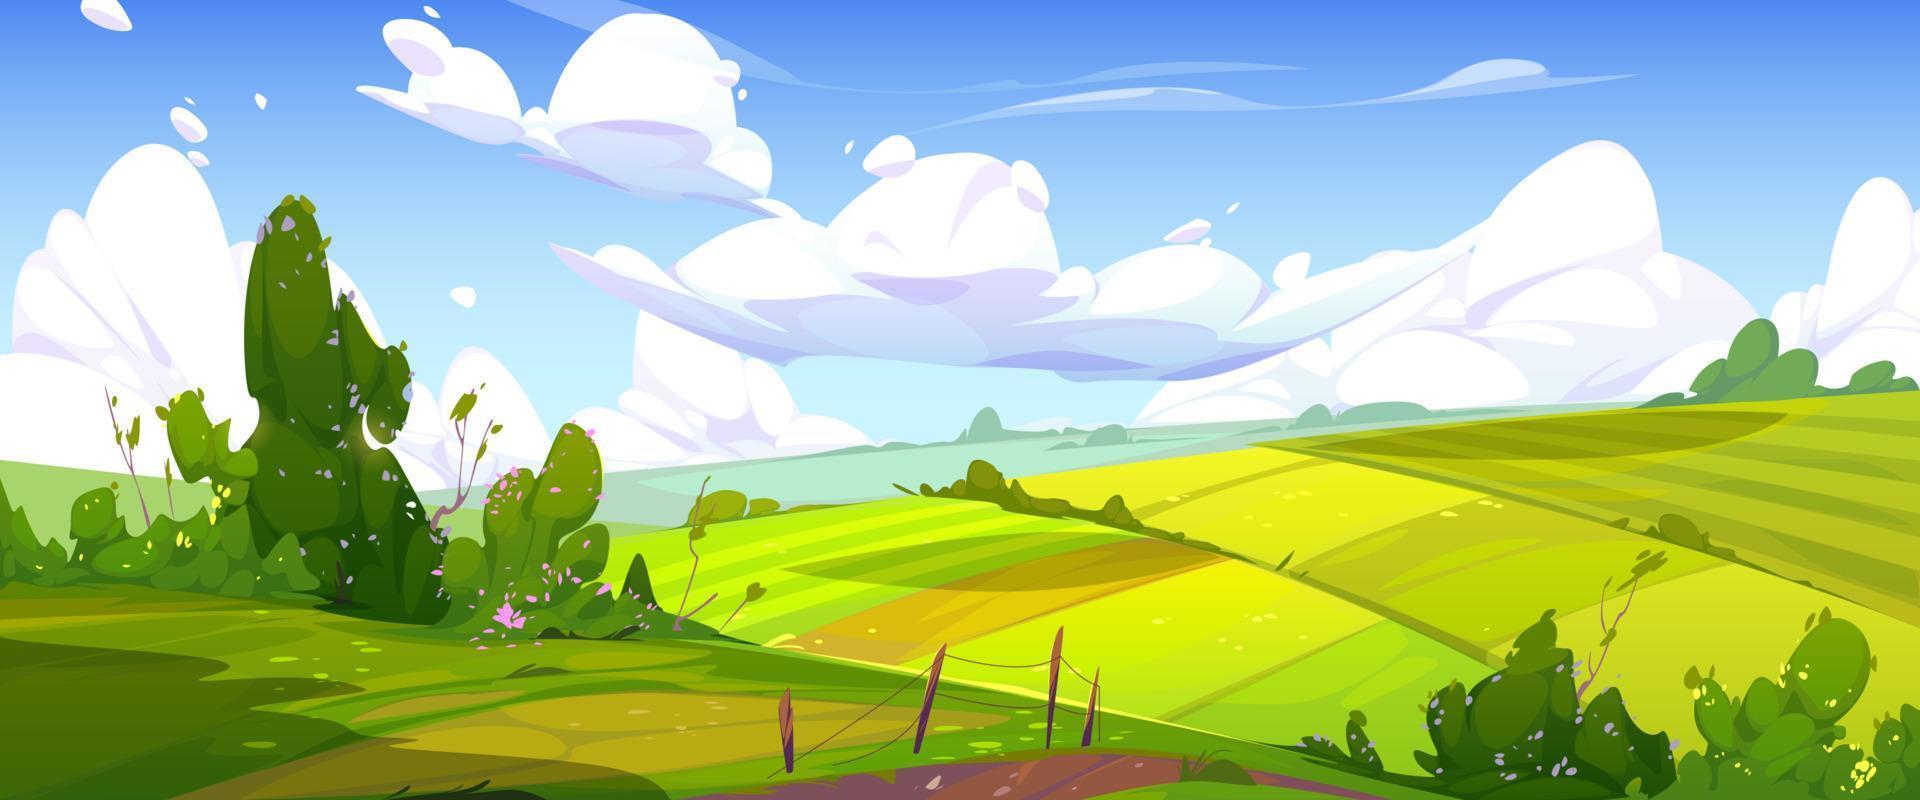 Rural landscape with green agriculture fields vector